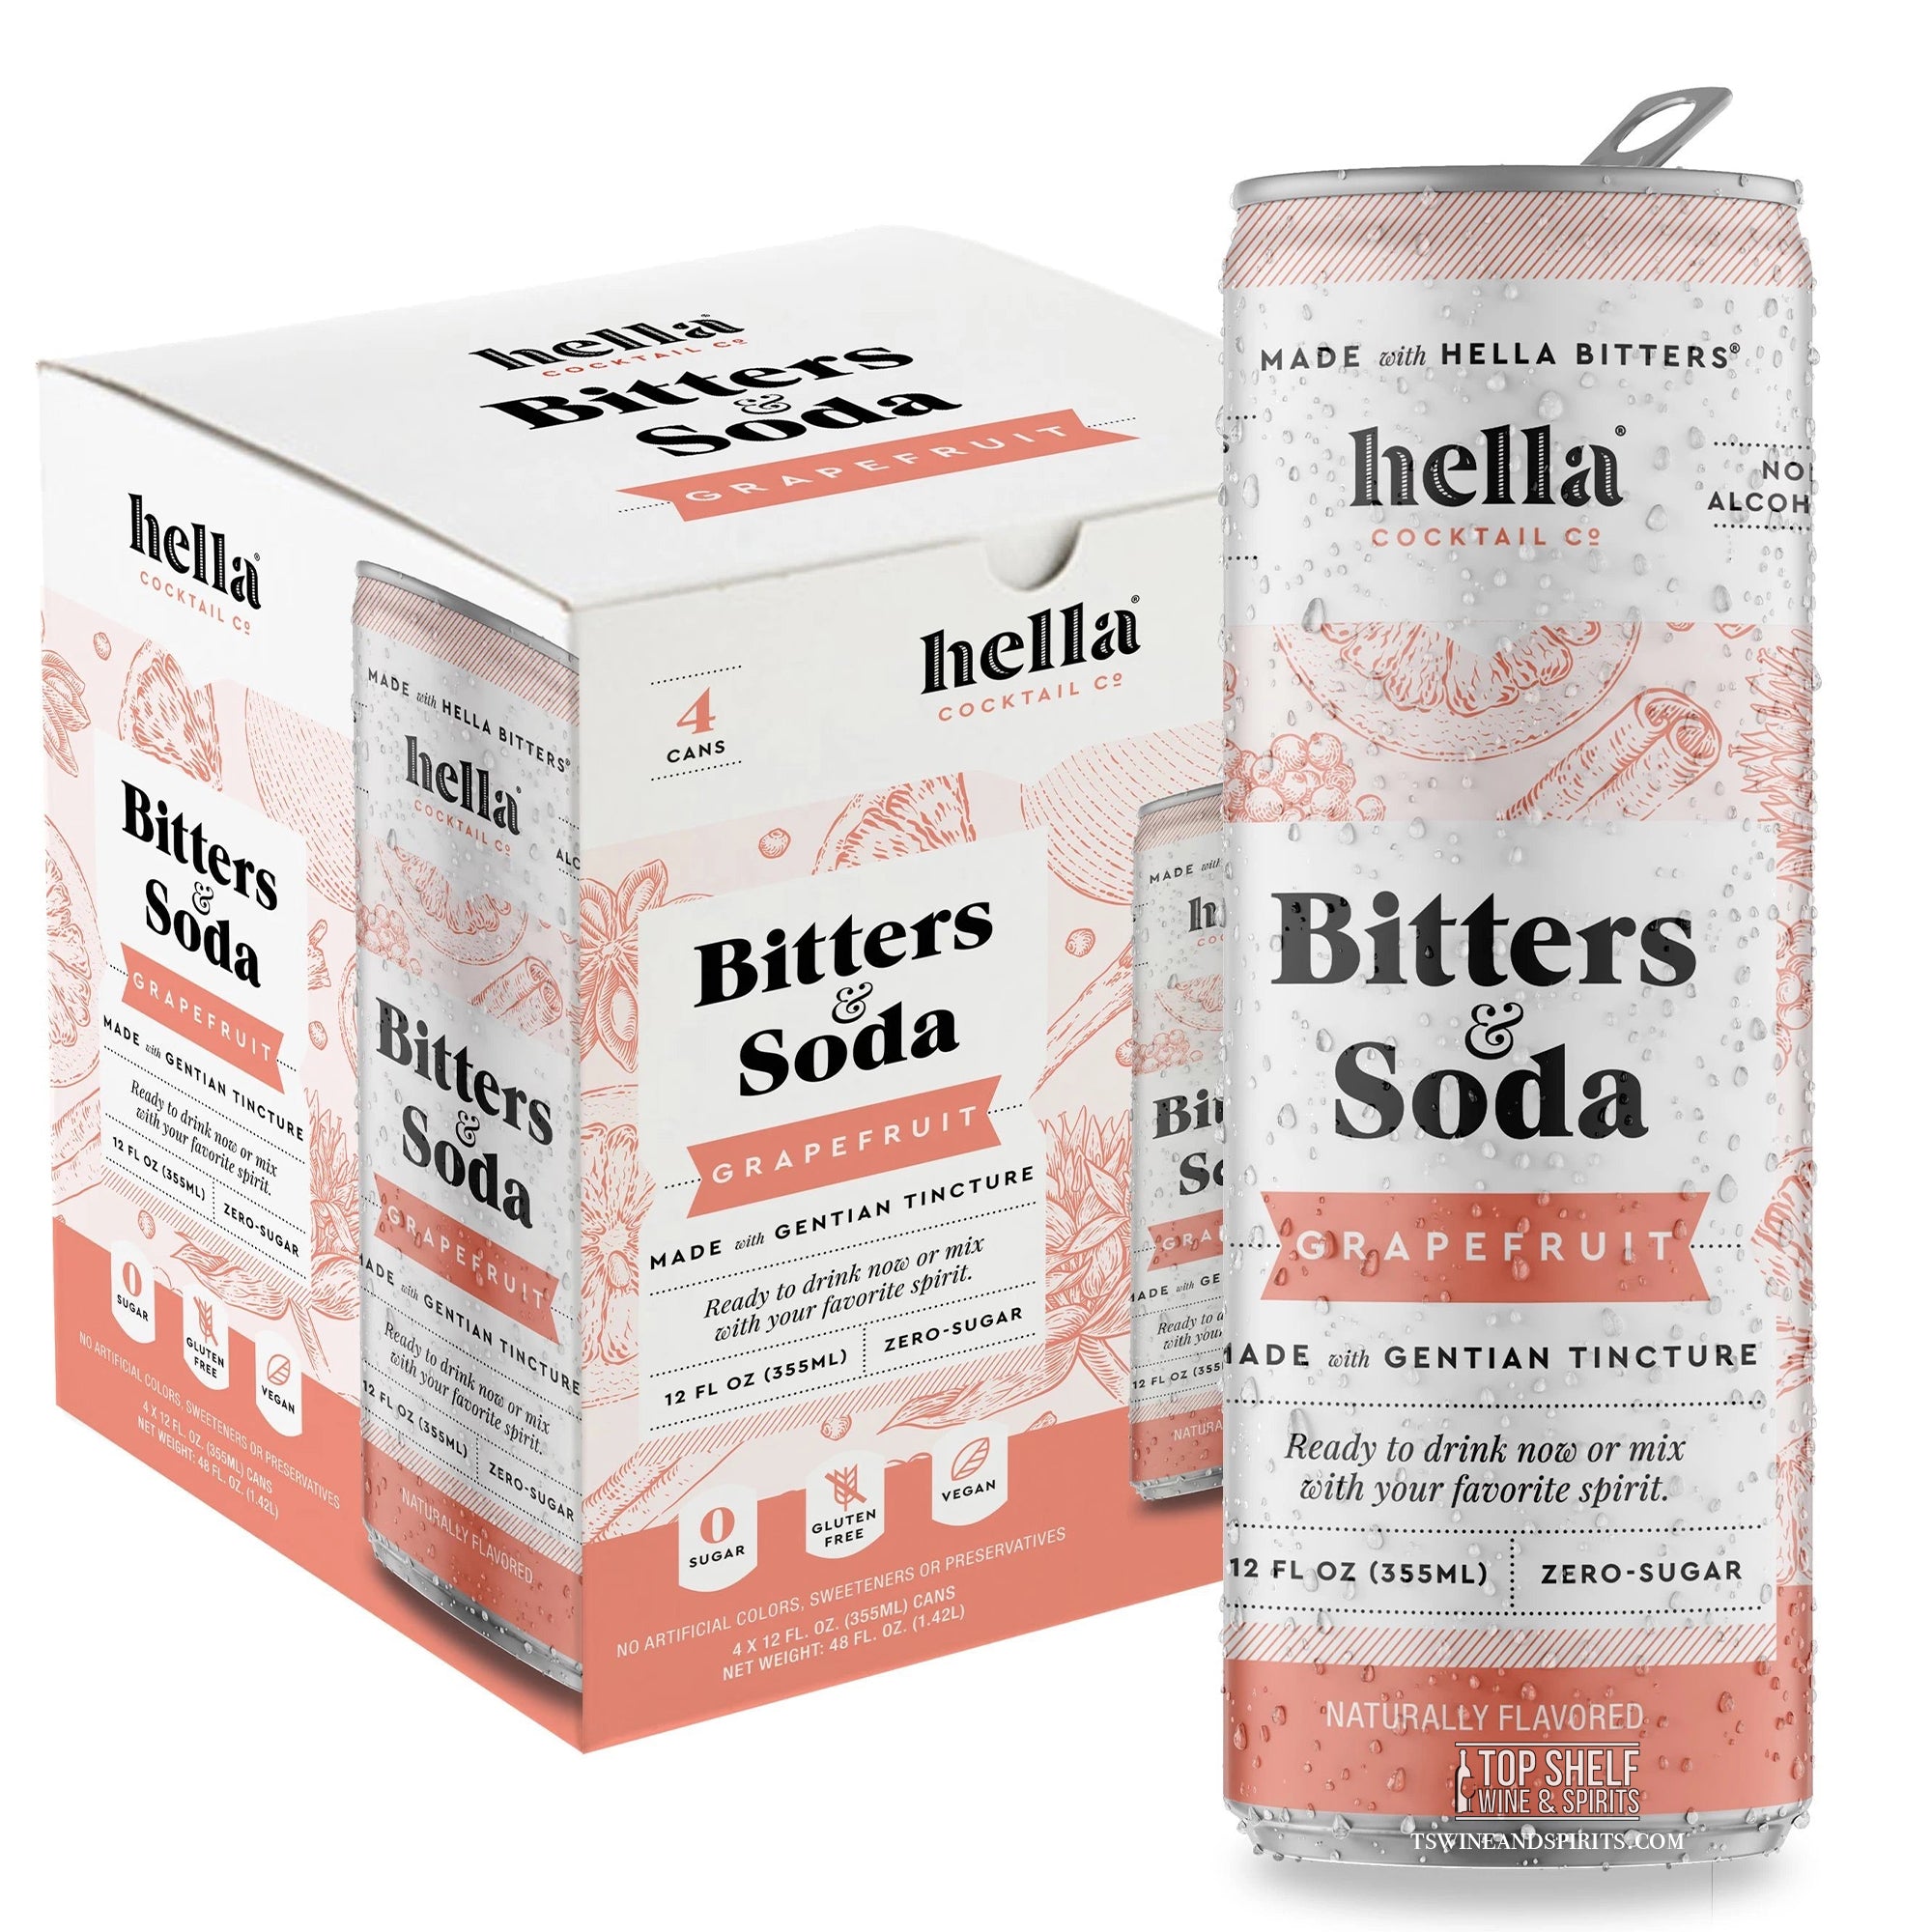 Hella Bitters & Soda Grapefruit 4 Pack Cans